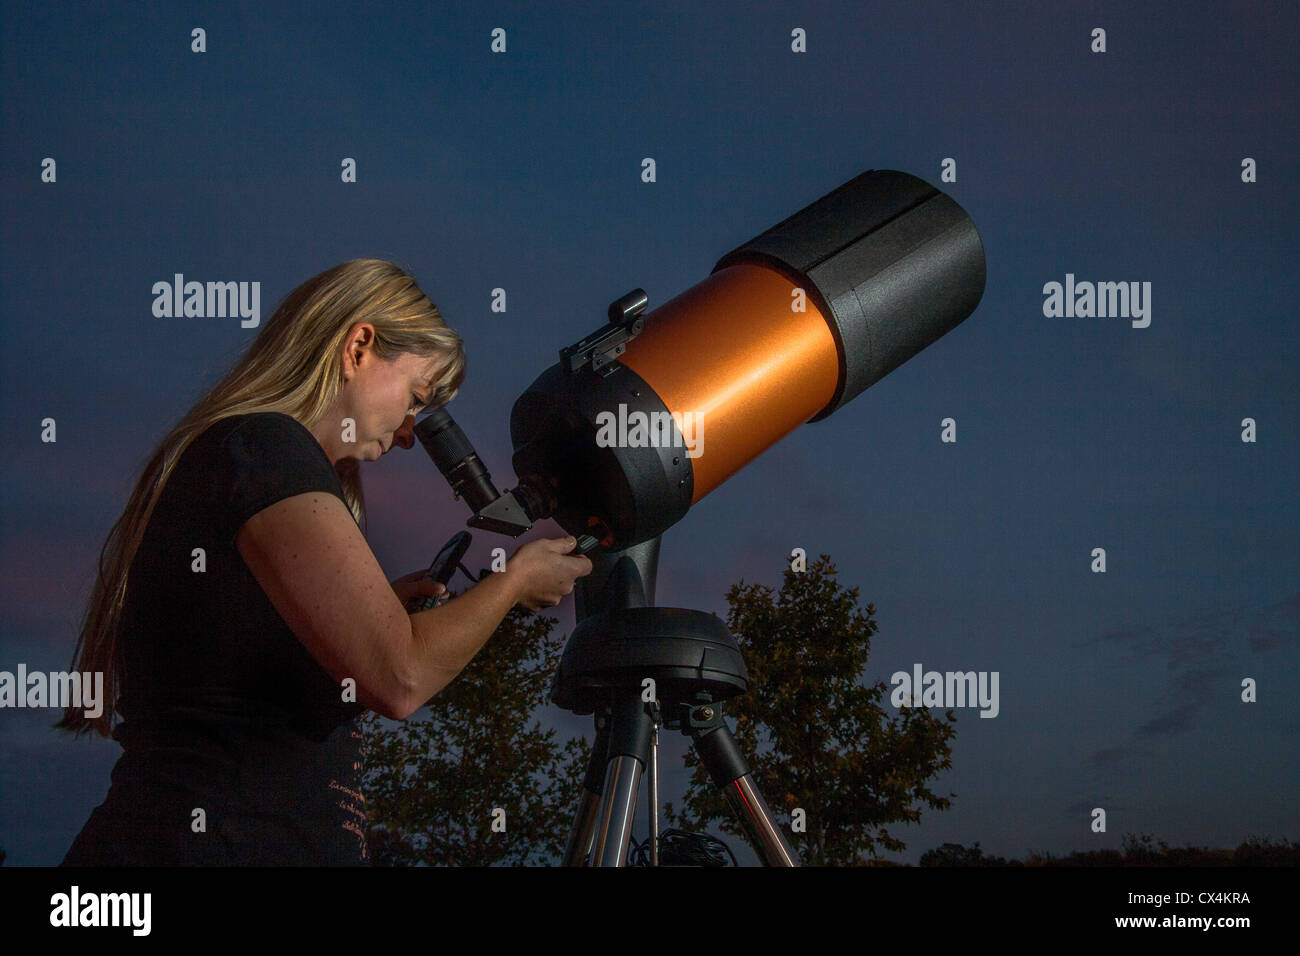 An young woman amateur astronomer uses a 2,000mm catadioptic telescope to look at the stars on an evening in Orange County, CA. Stock Photo